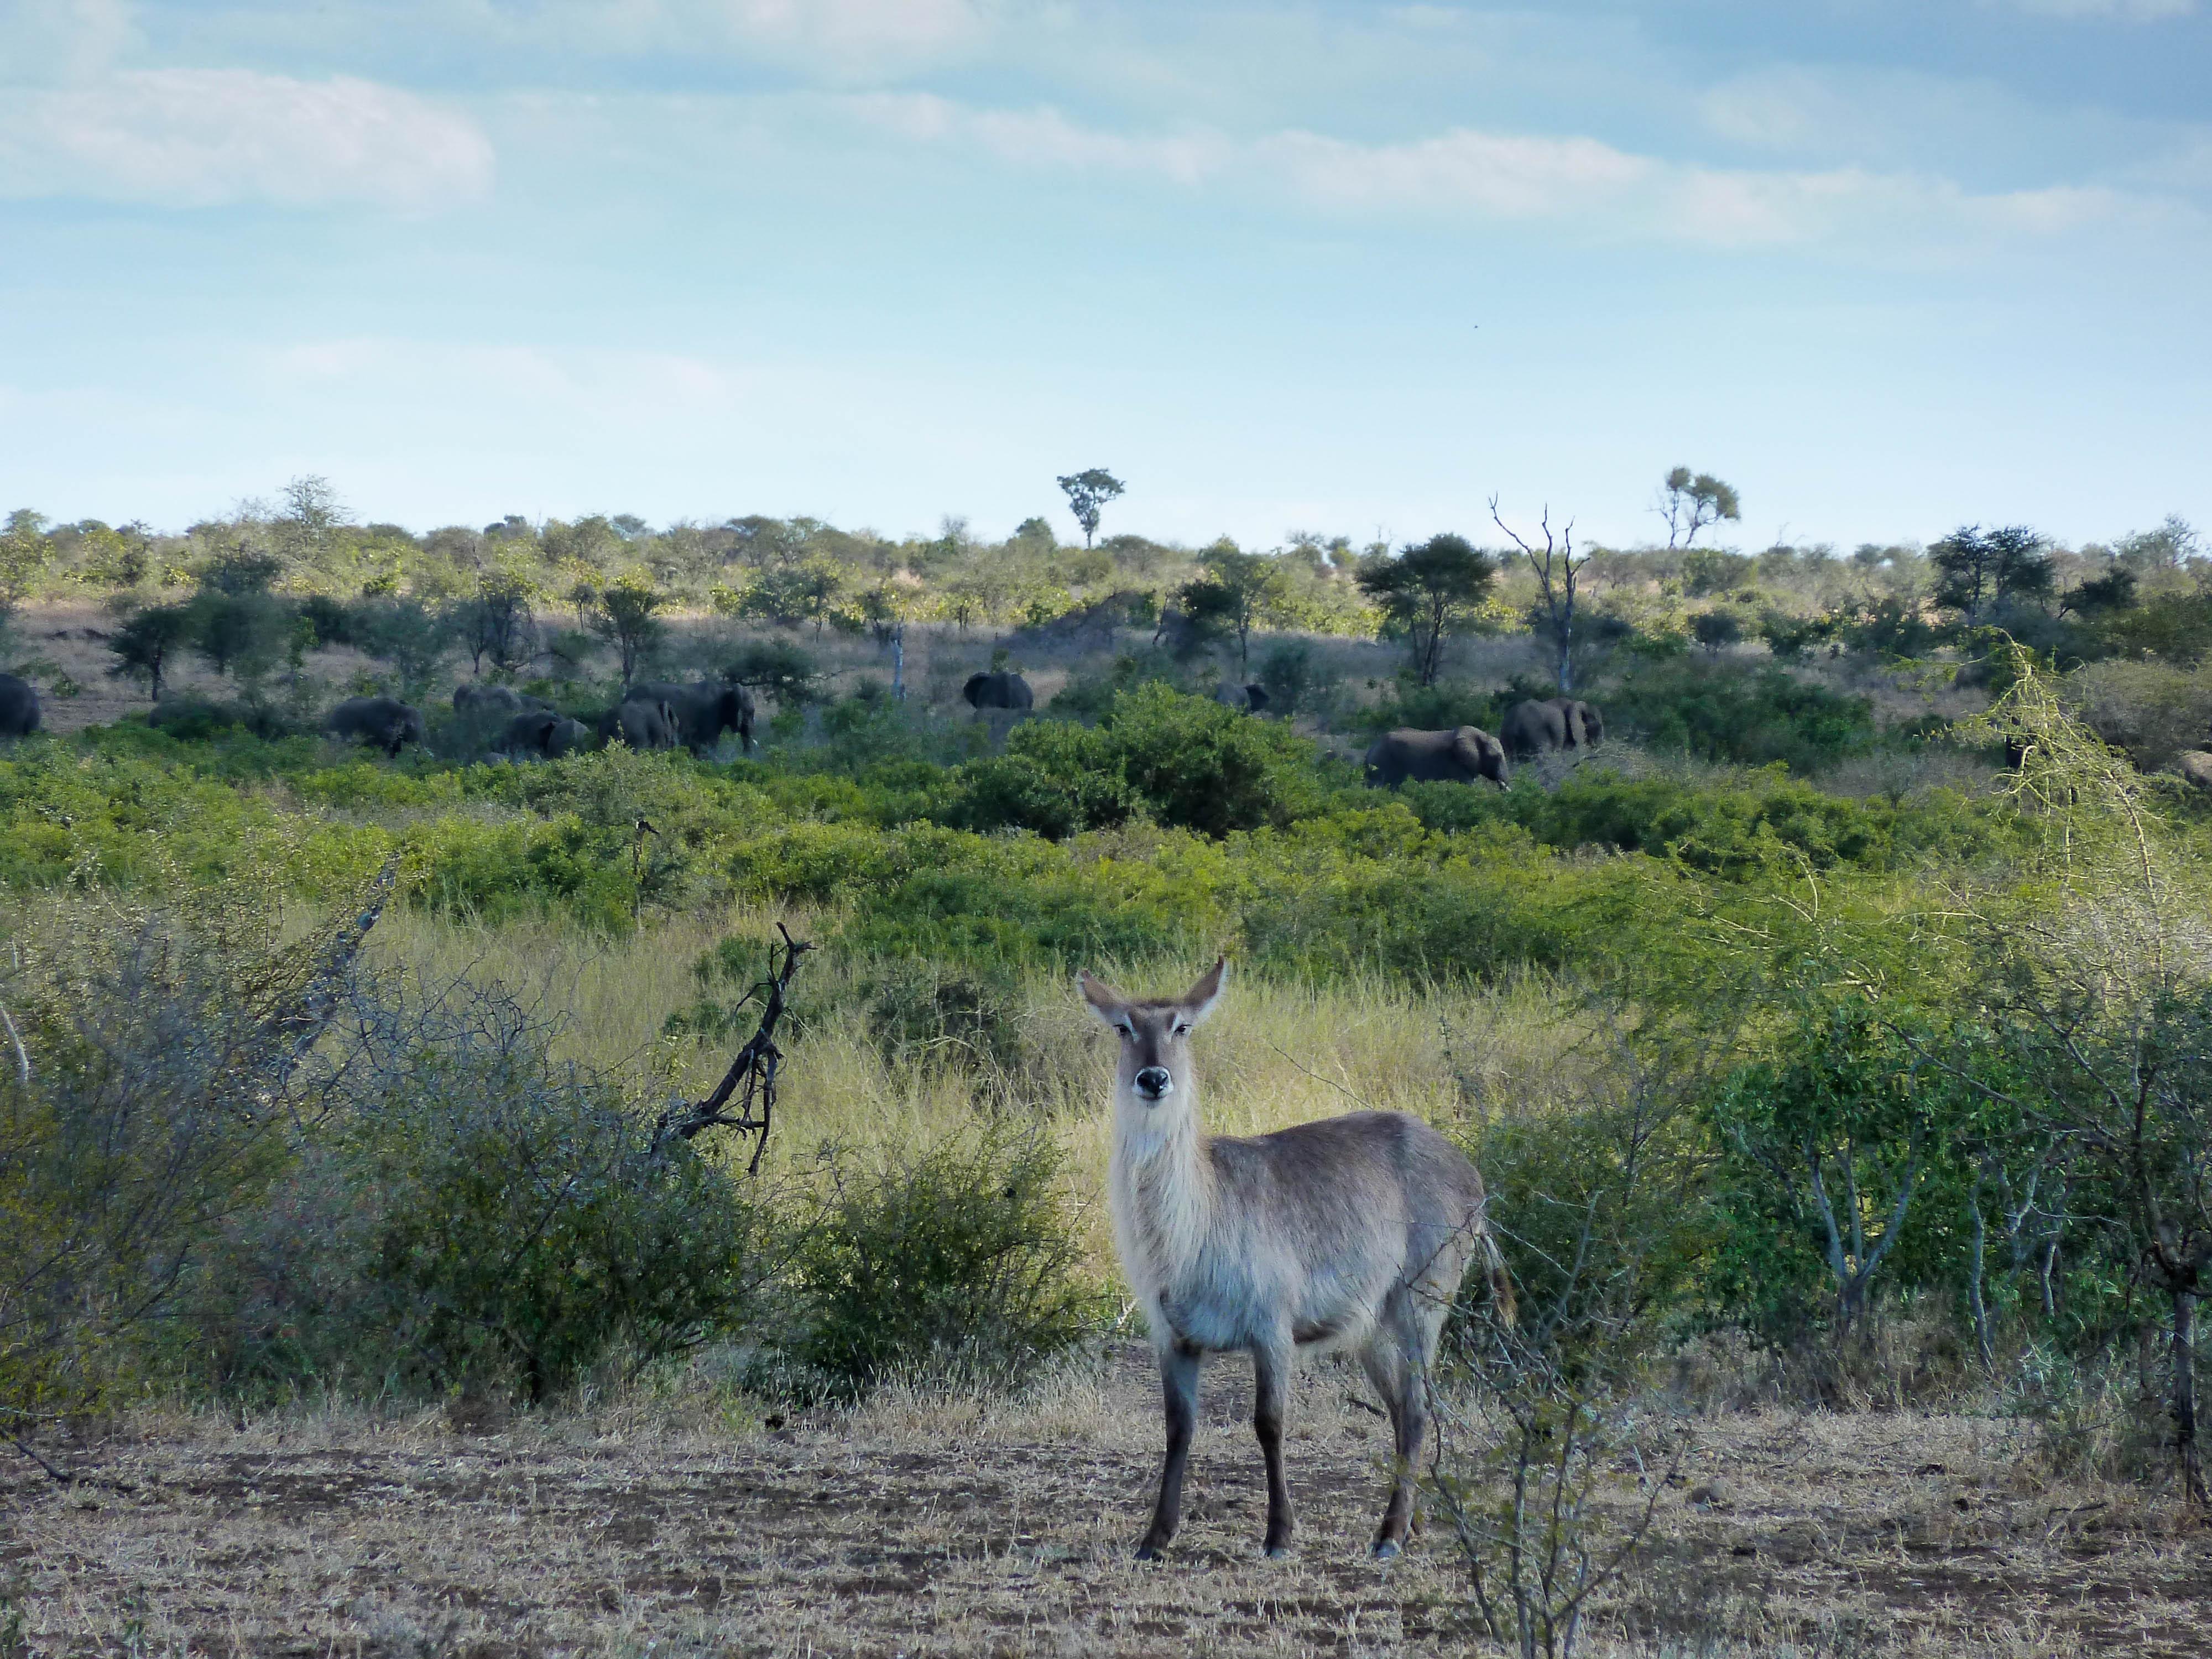 <p>A waterbuck stands in the open, with a herd of elephants in the distance. The waterbuck is a species of antelope, and prefers to stay near water as its strong swimming skills can serve as a defence mechanism.<br /></p>